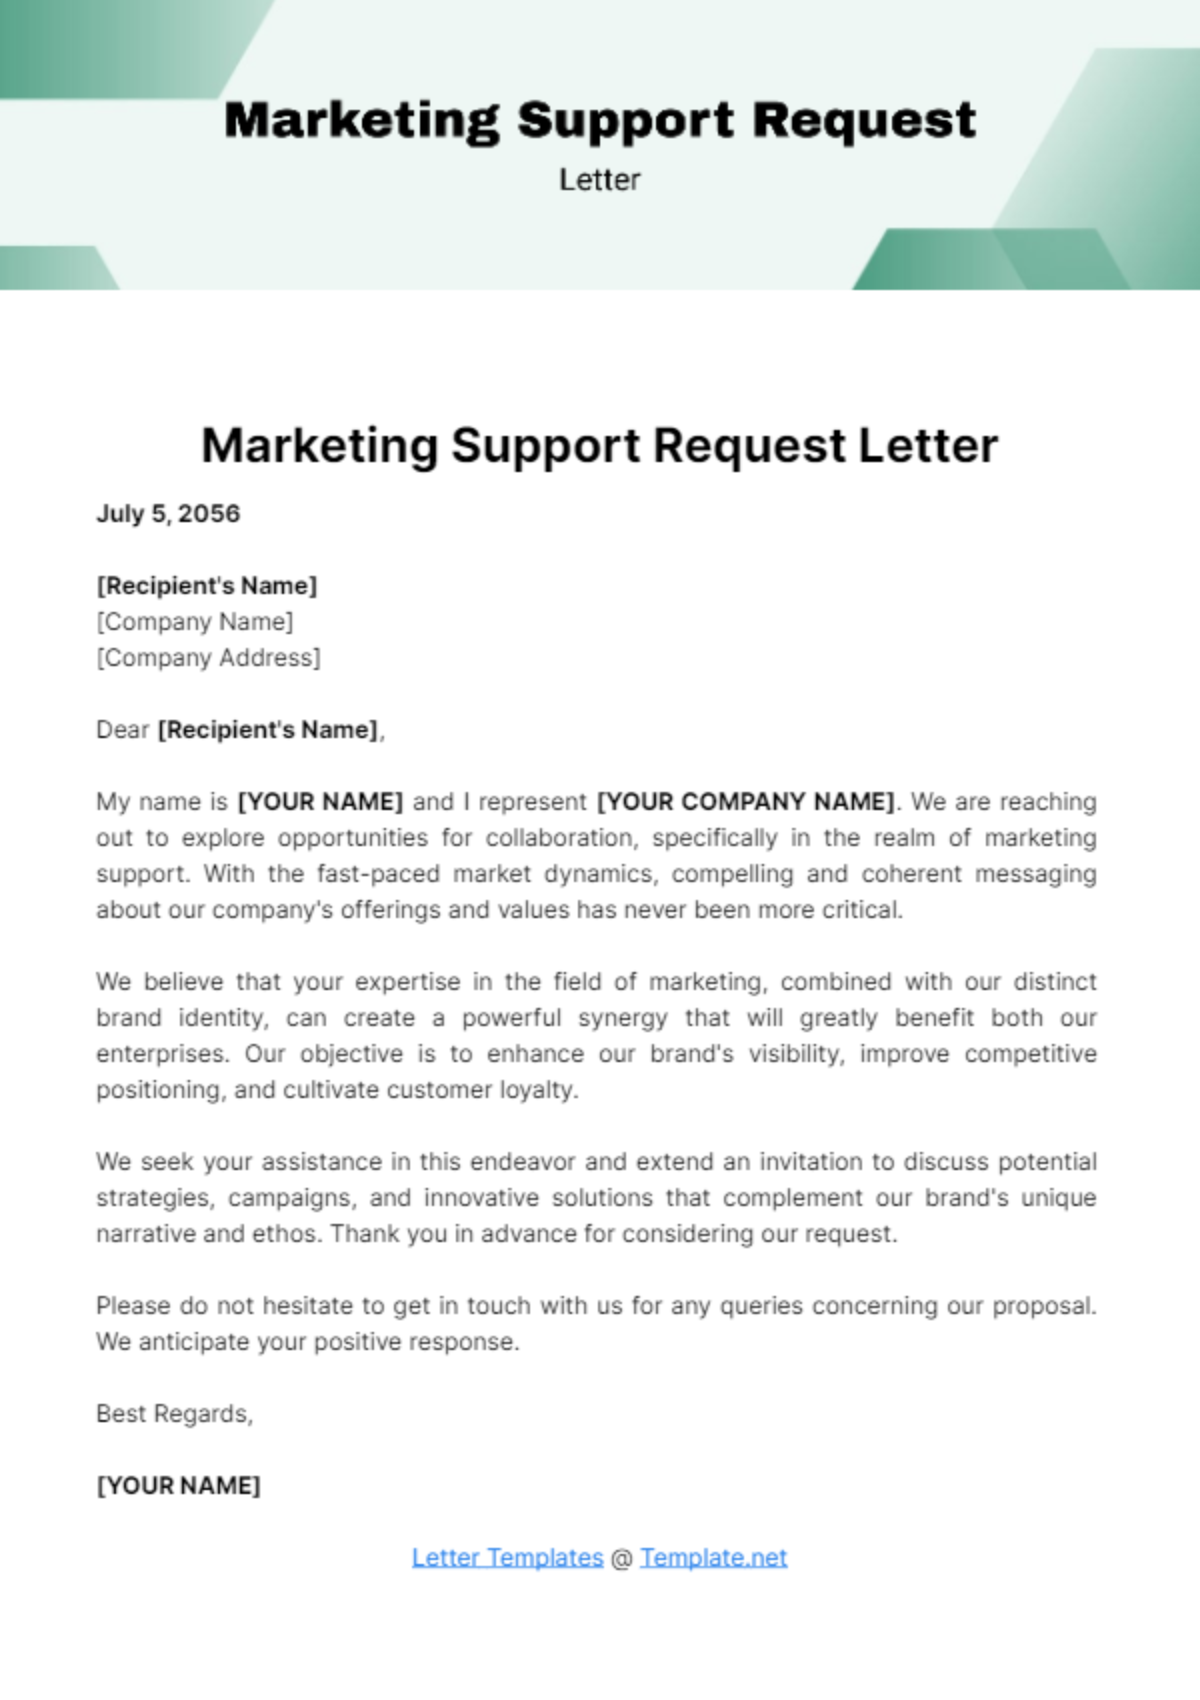 Marketing Support Request Letter Template